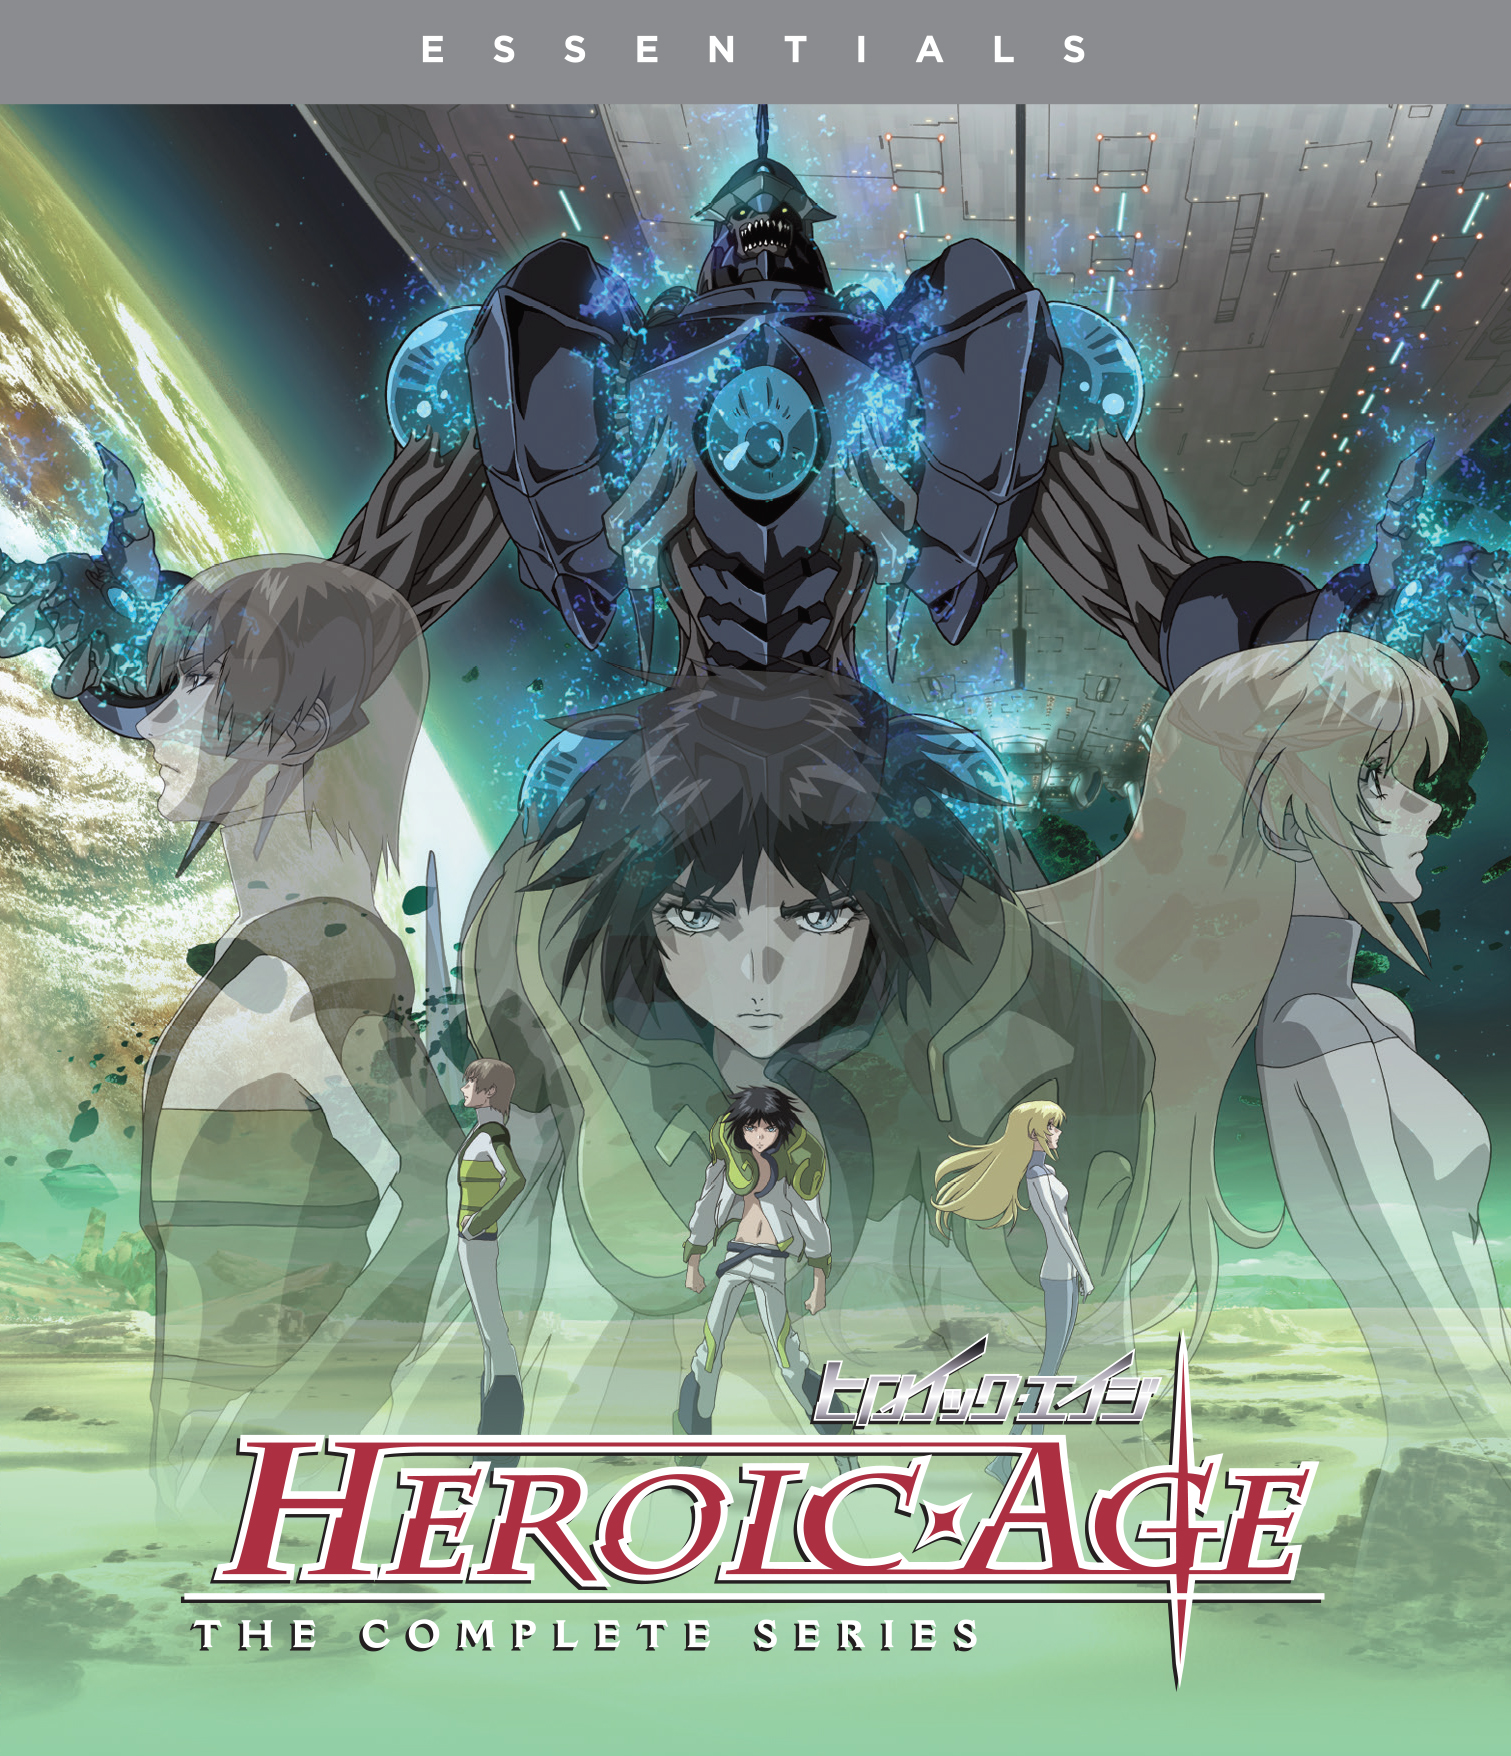  Review for Heroic Age: The Complete Series